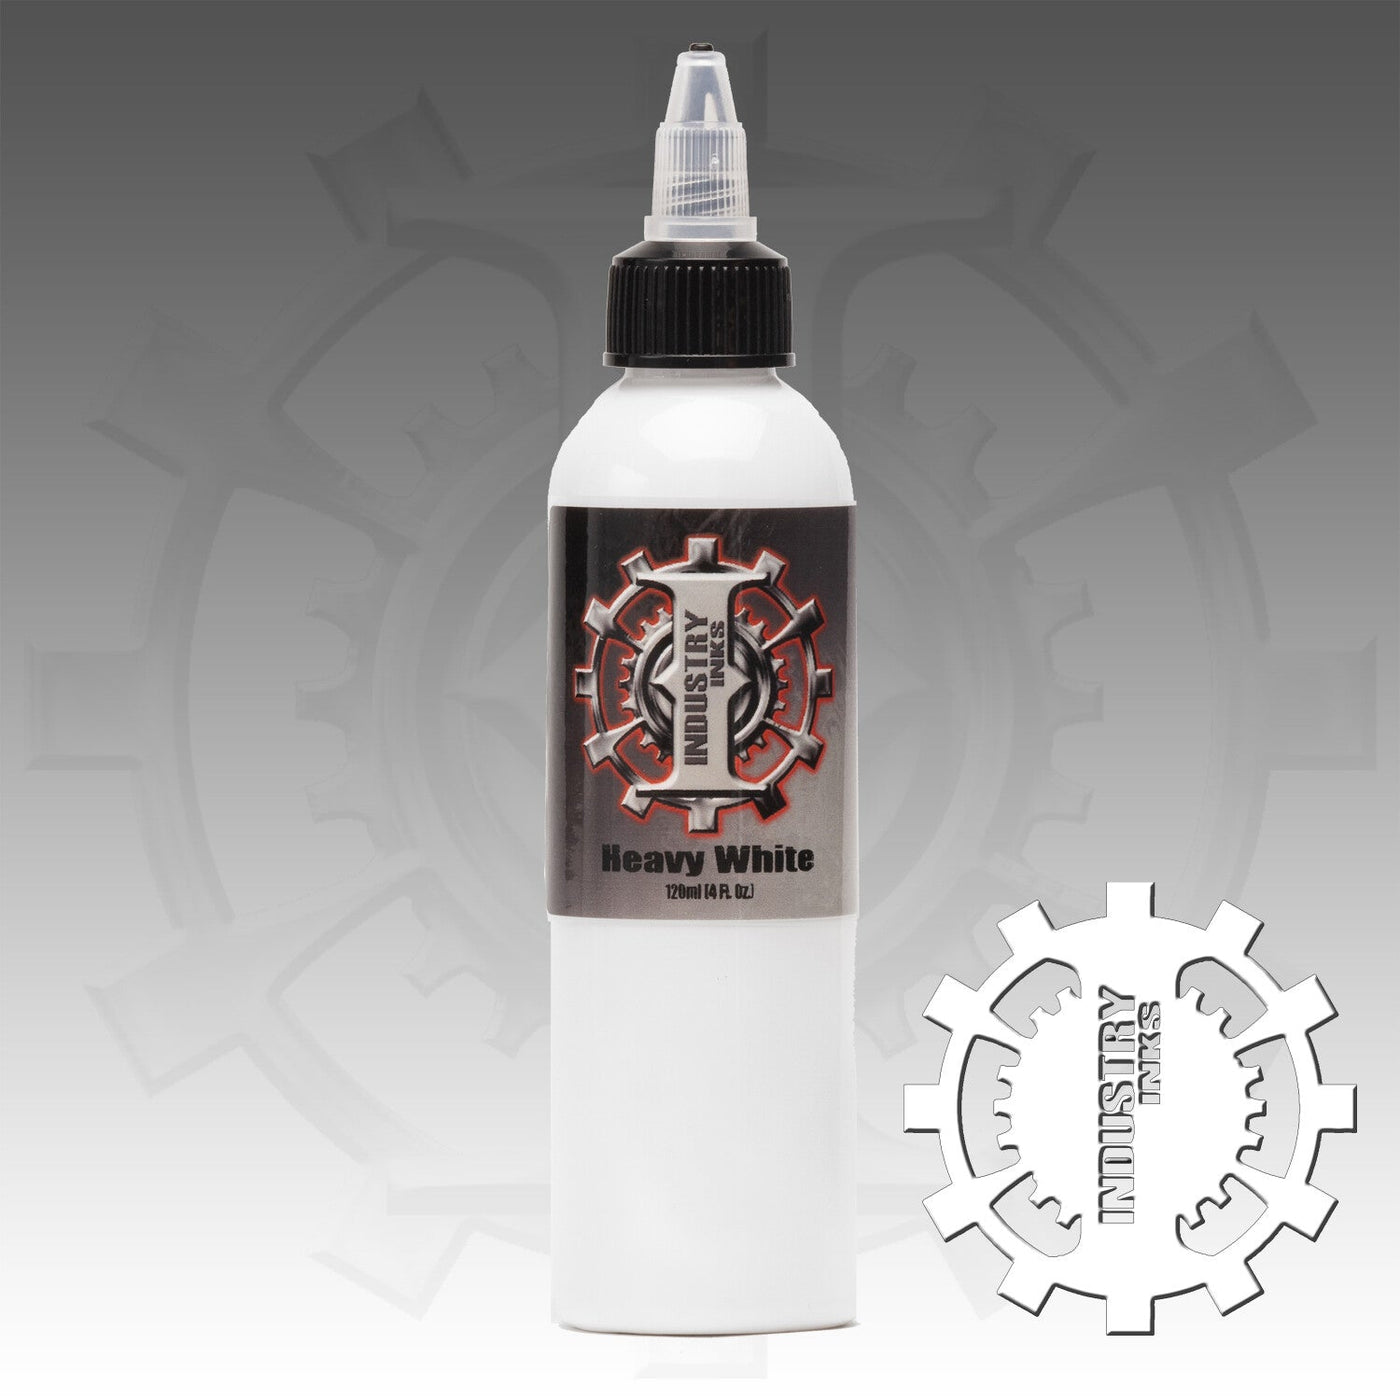 Industry Ink Heavy White - Tattoo Ink - Mithra Tattoo Supplies Canada